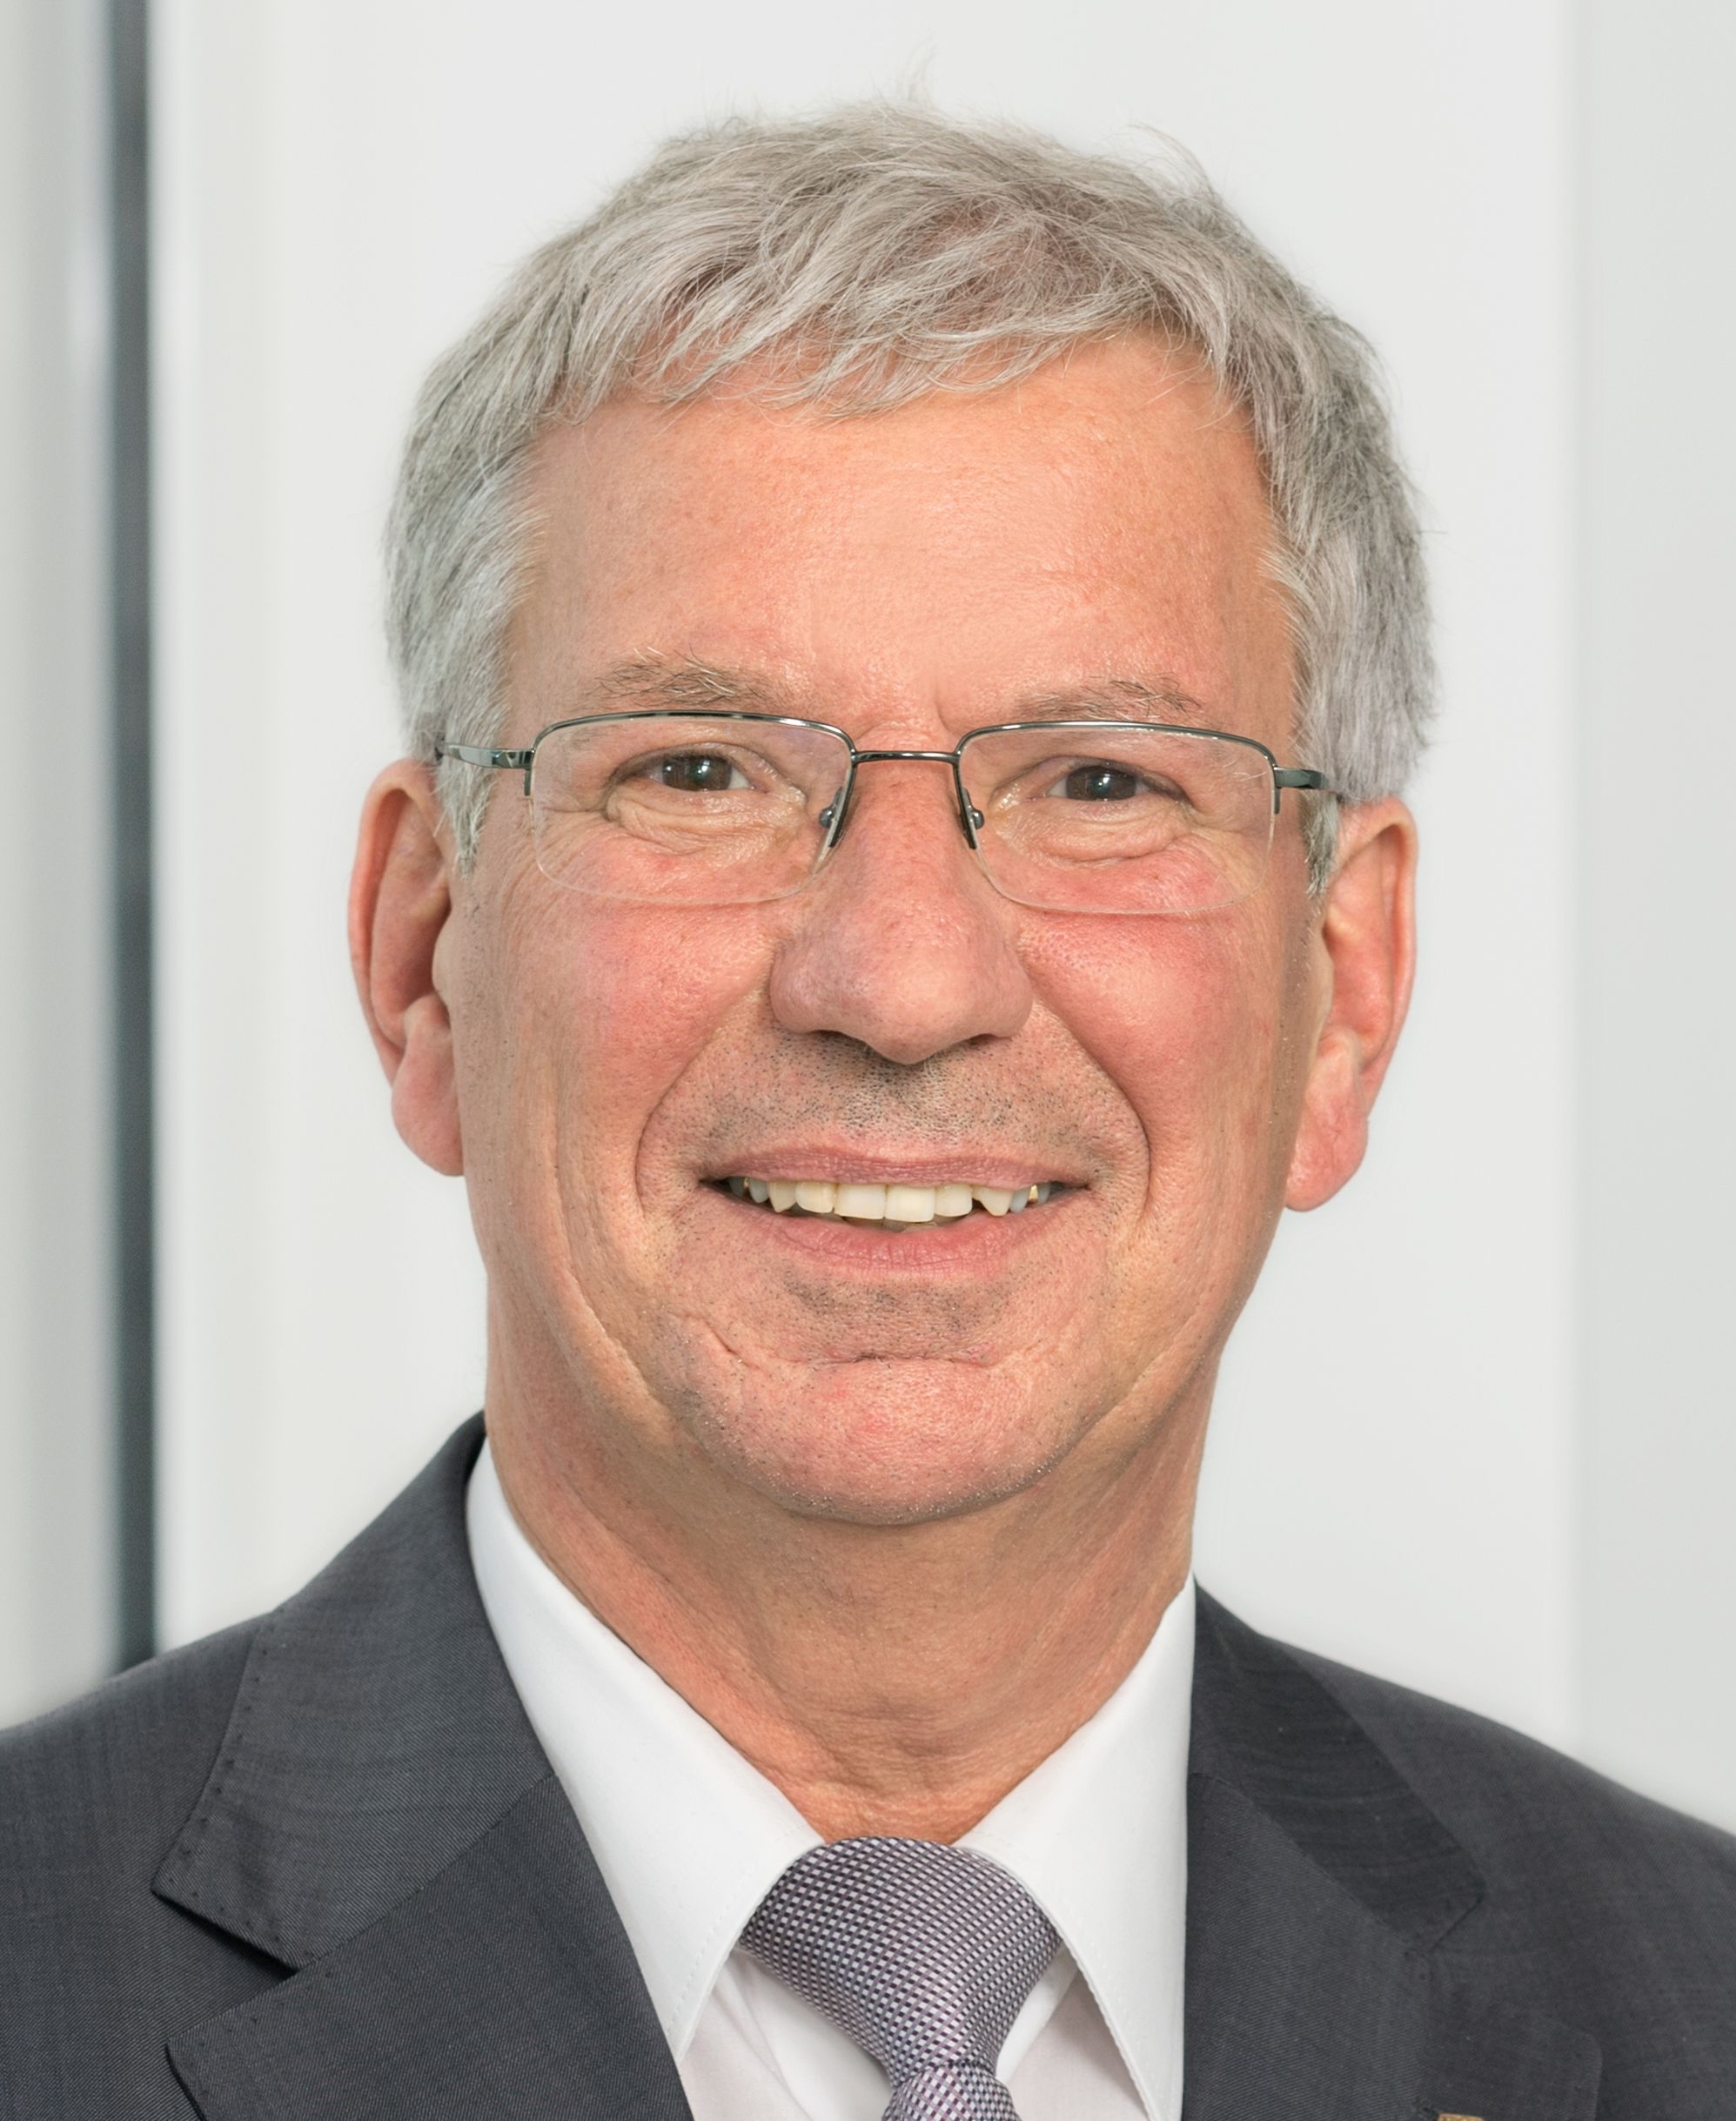 Prof. Dr. Winfried Petry